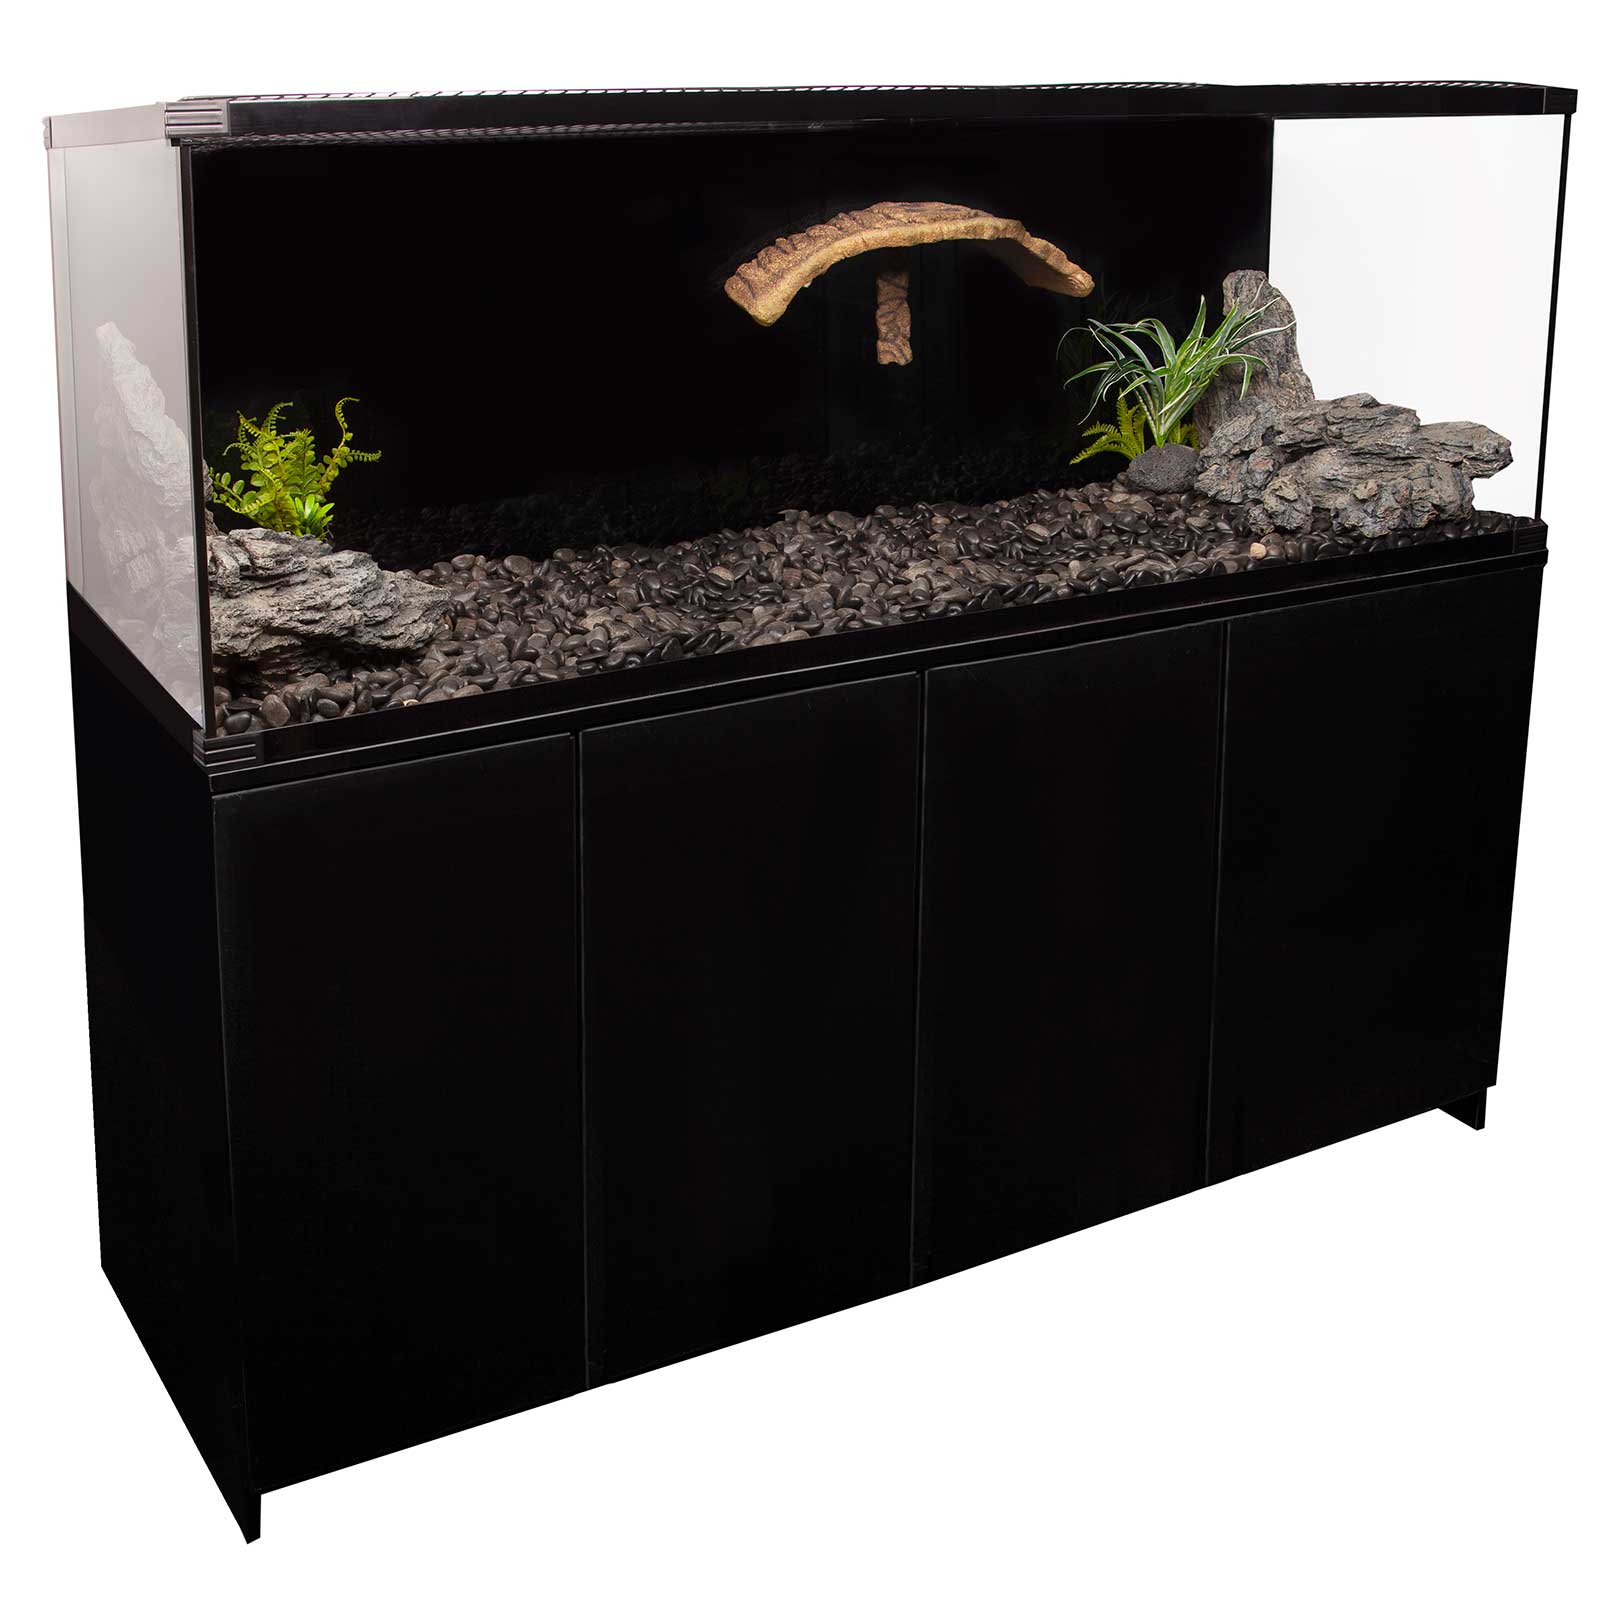 Buy Reptile One Eco180 Turtle Tank and Cabinet Online